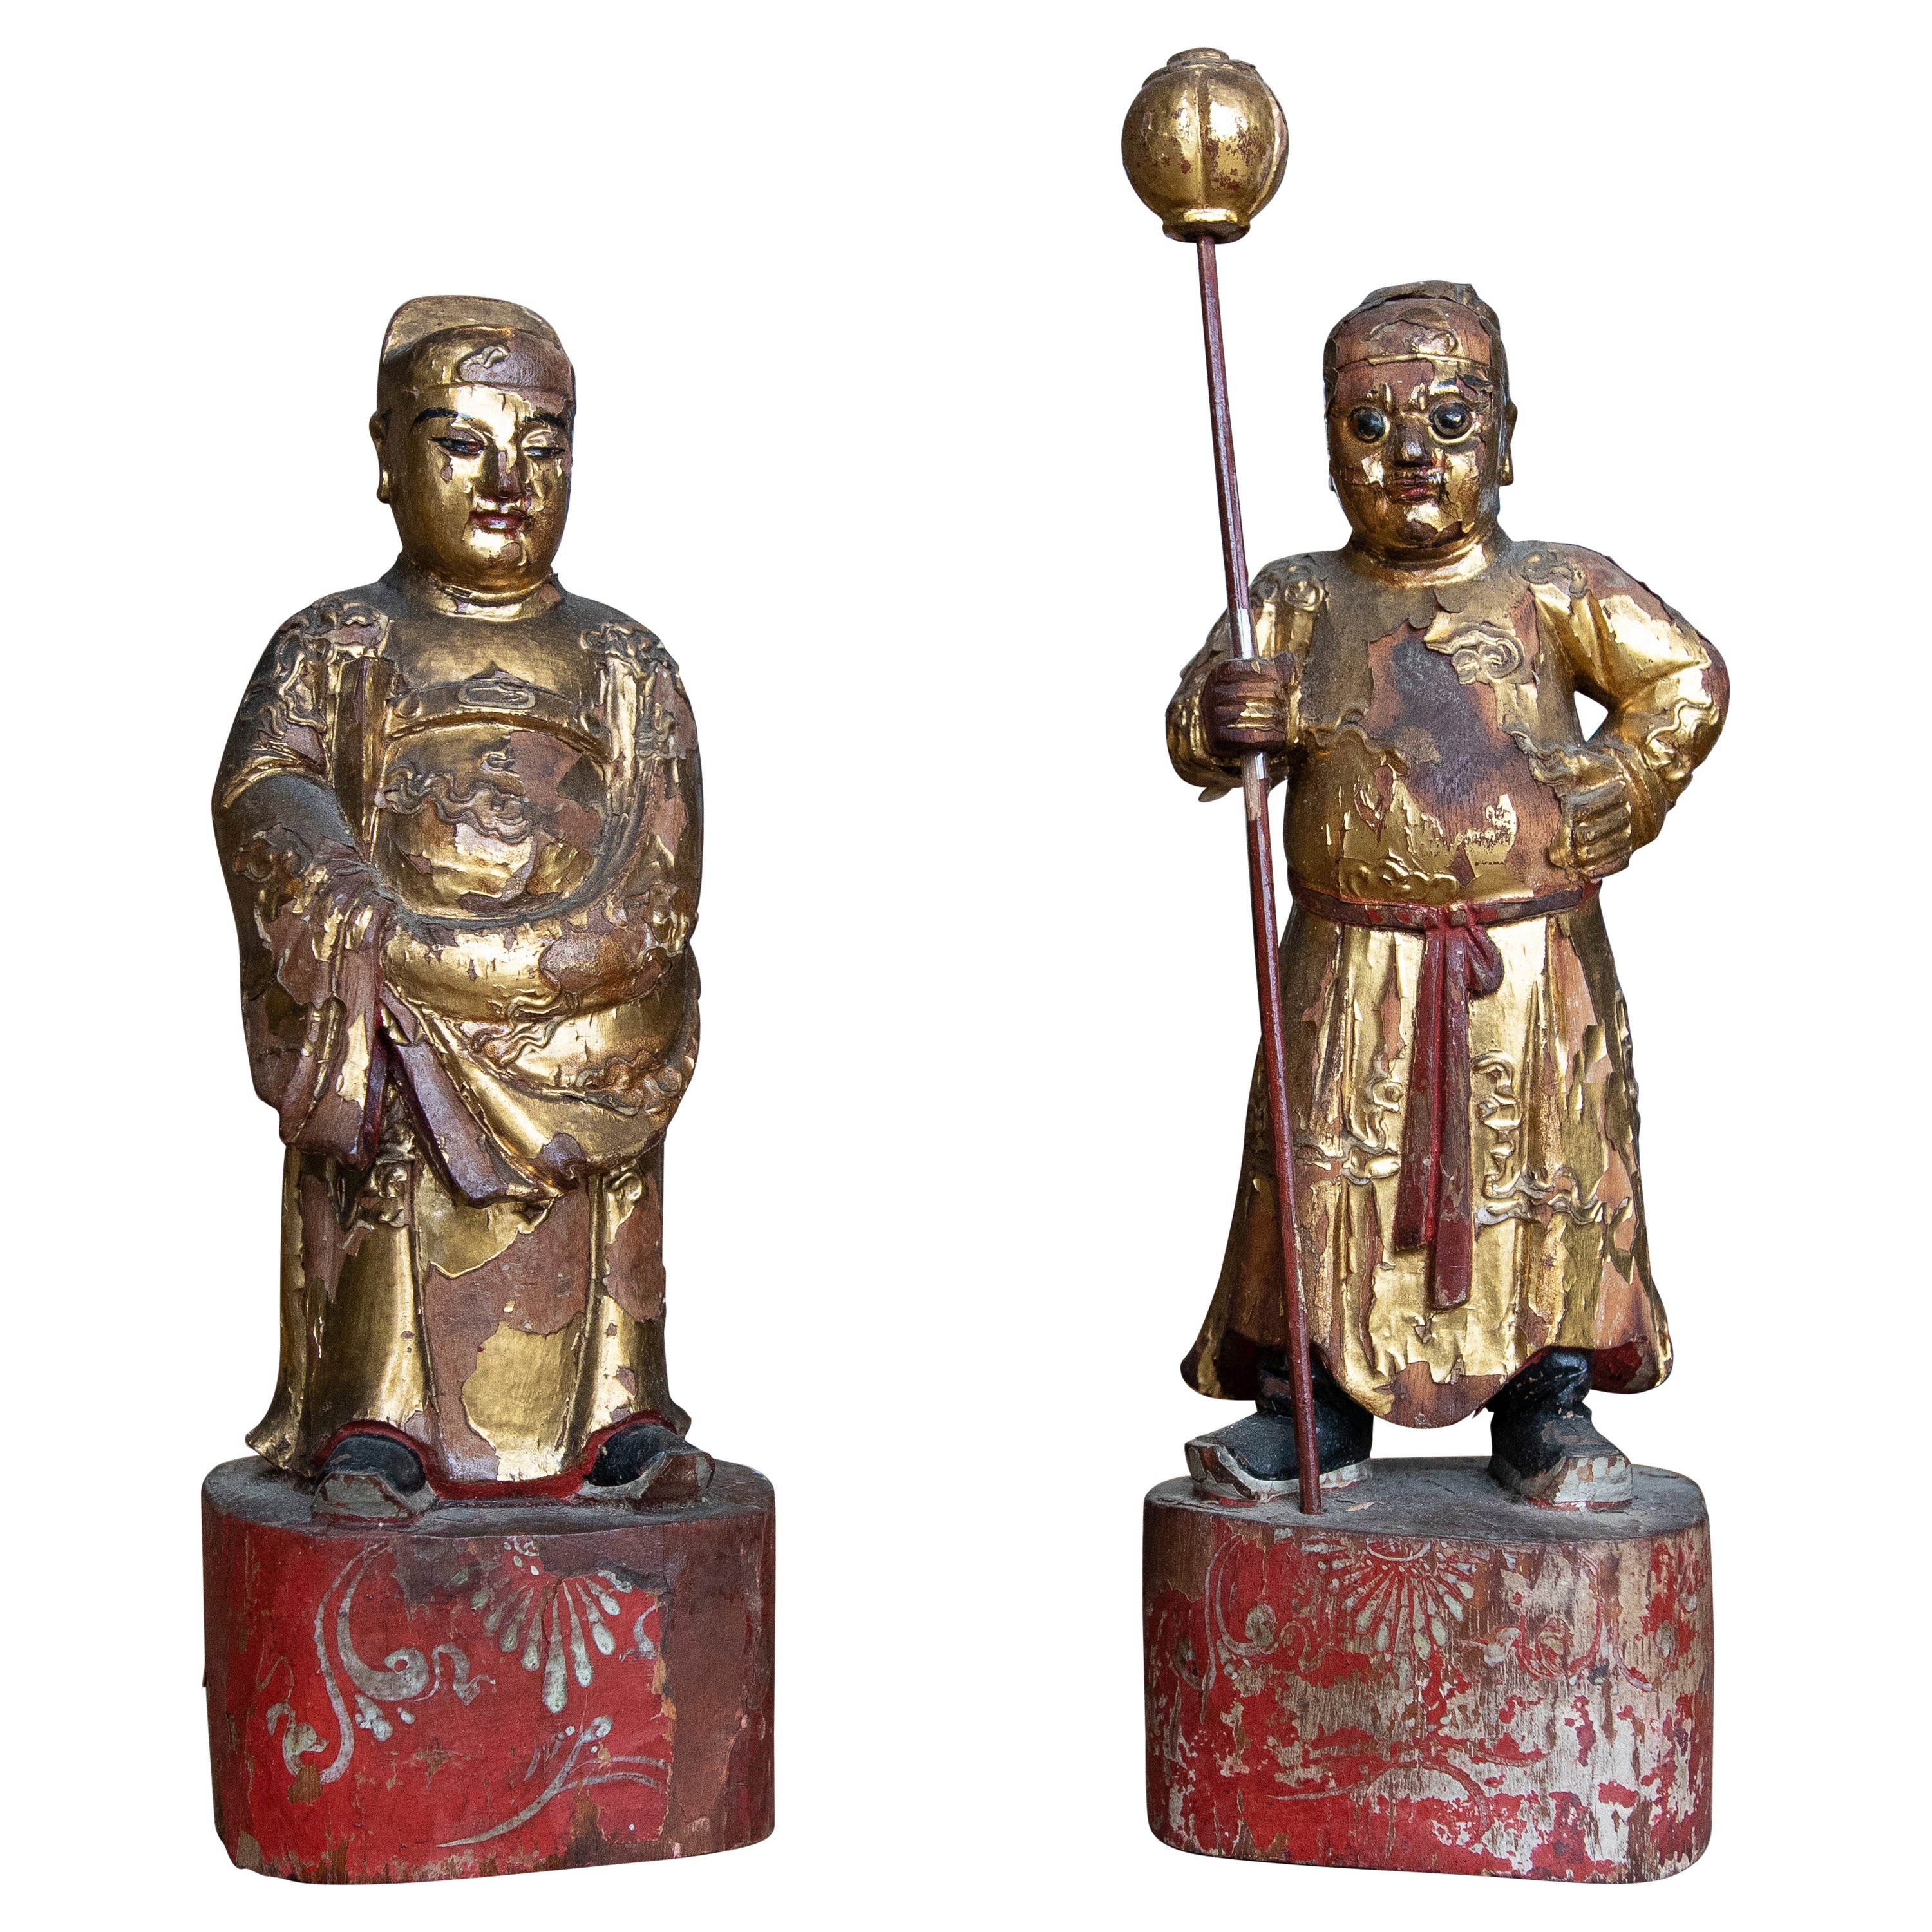 Chinese Pair of Wood Carved and Polychrome Sculptures of Chinese Warriors